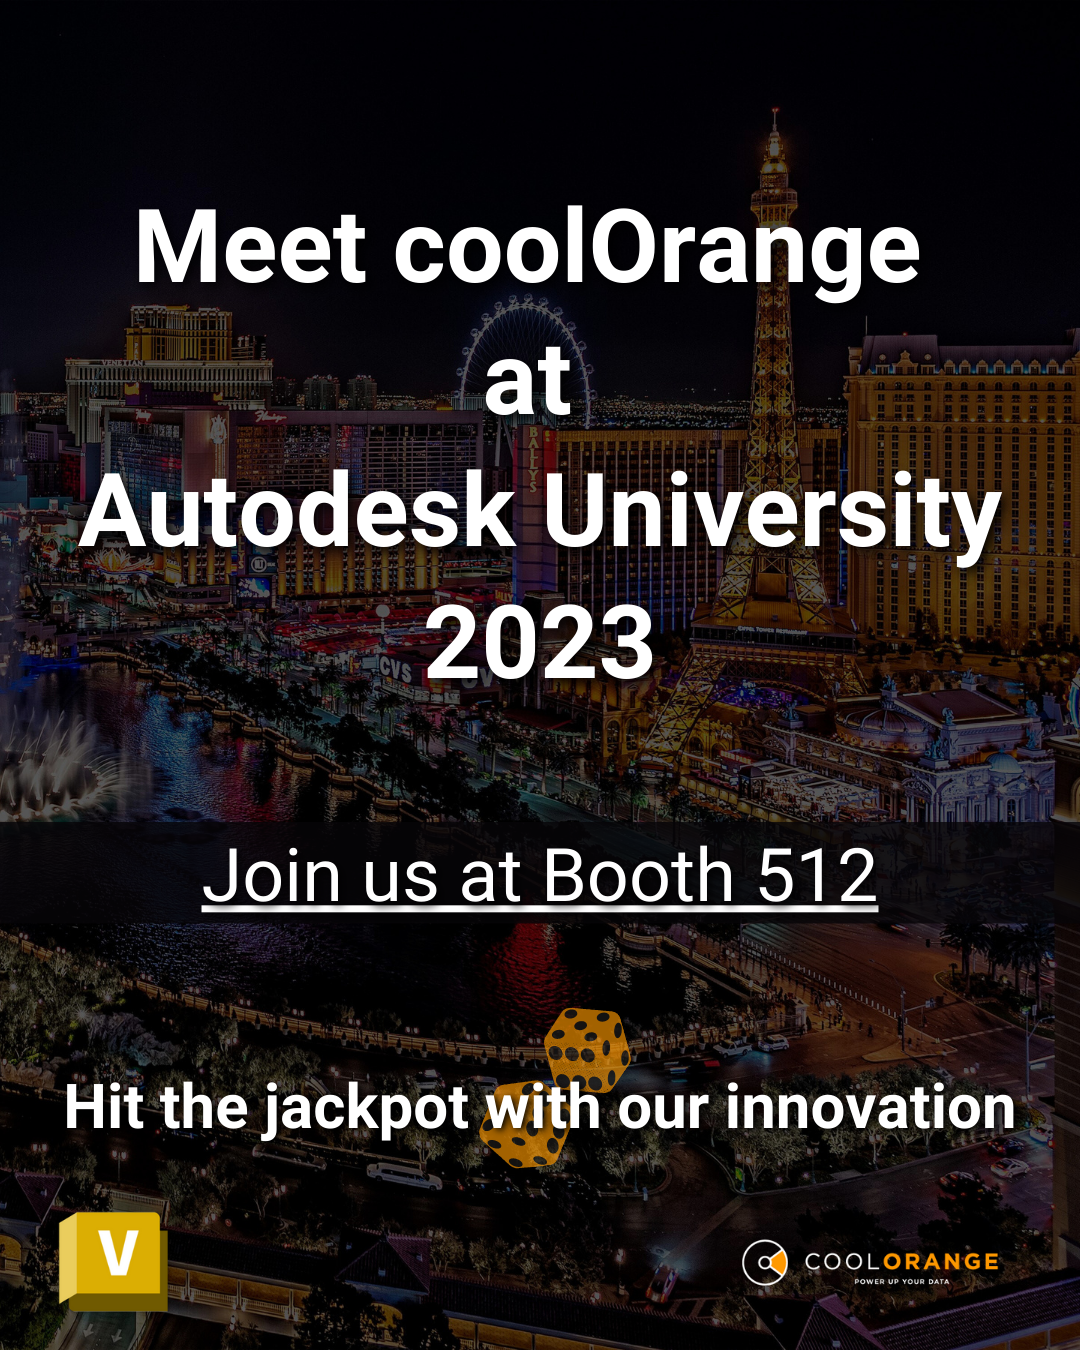 COOLORANGE returns to Autodesk University 2023 with a booth to Connect with You